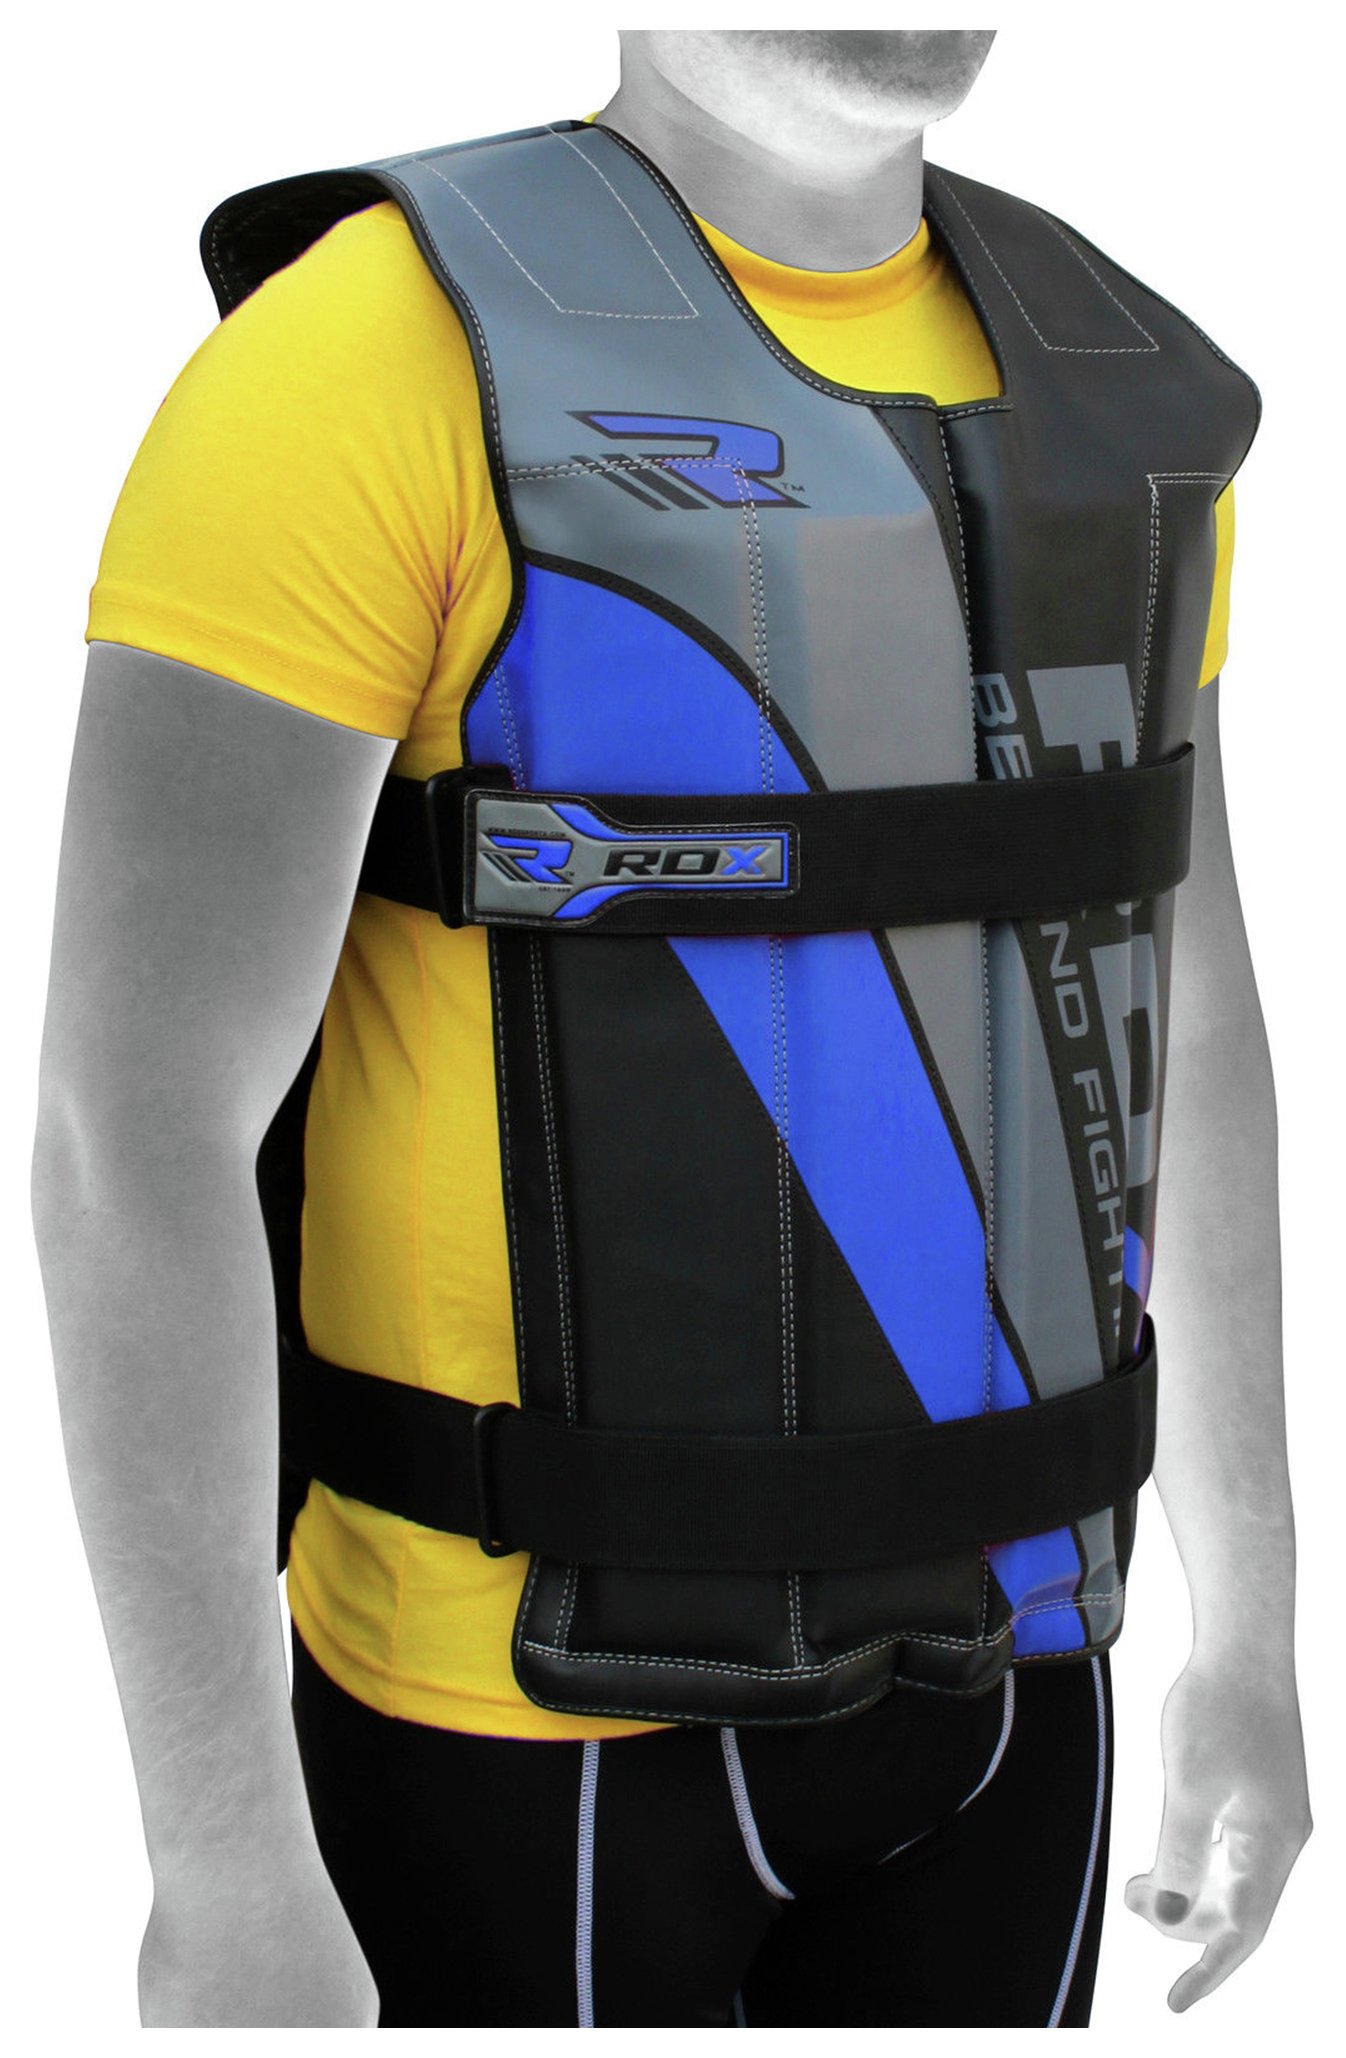 A person wearing RDX adjustable weighted vest